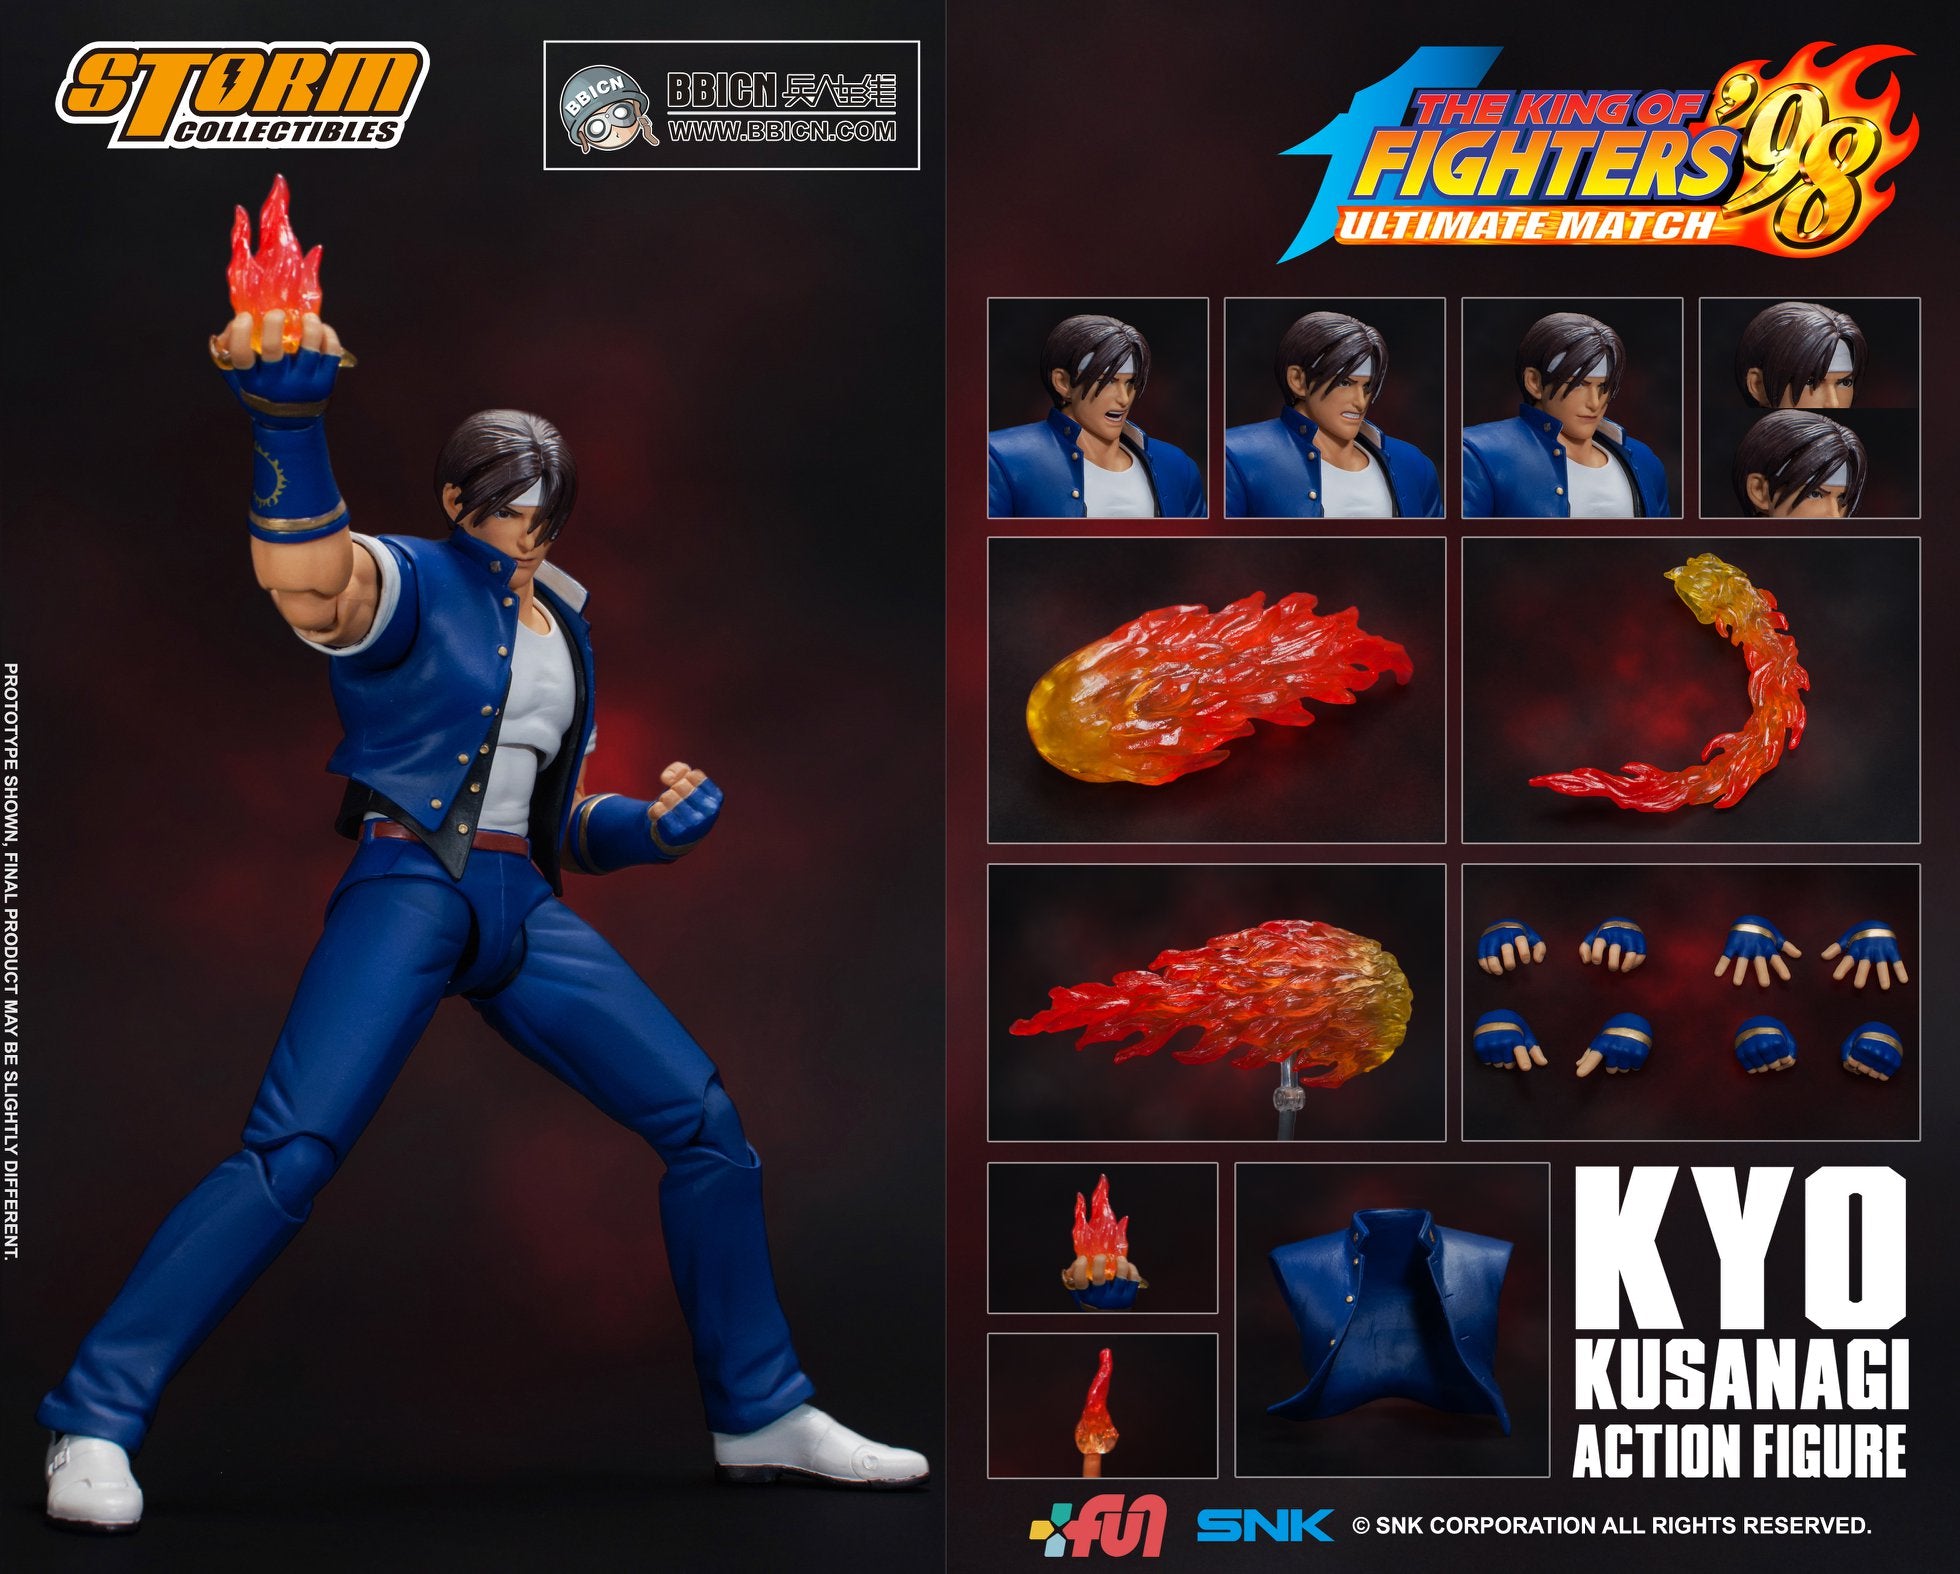 Storm Collectibles - The King of Fighters &#39;98 Ultimate Match - Kyo Kusanagi (Wonder Festival 2019 Exclusive) - Marvelous Toys